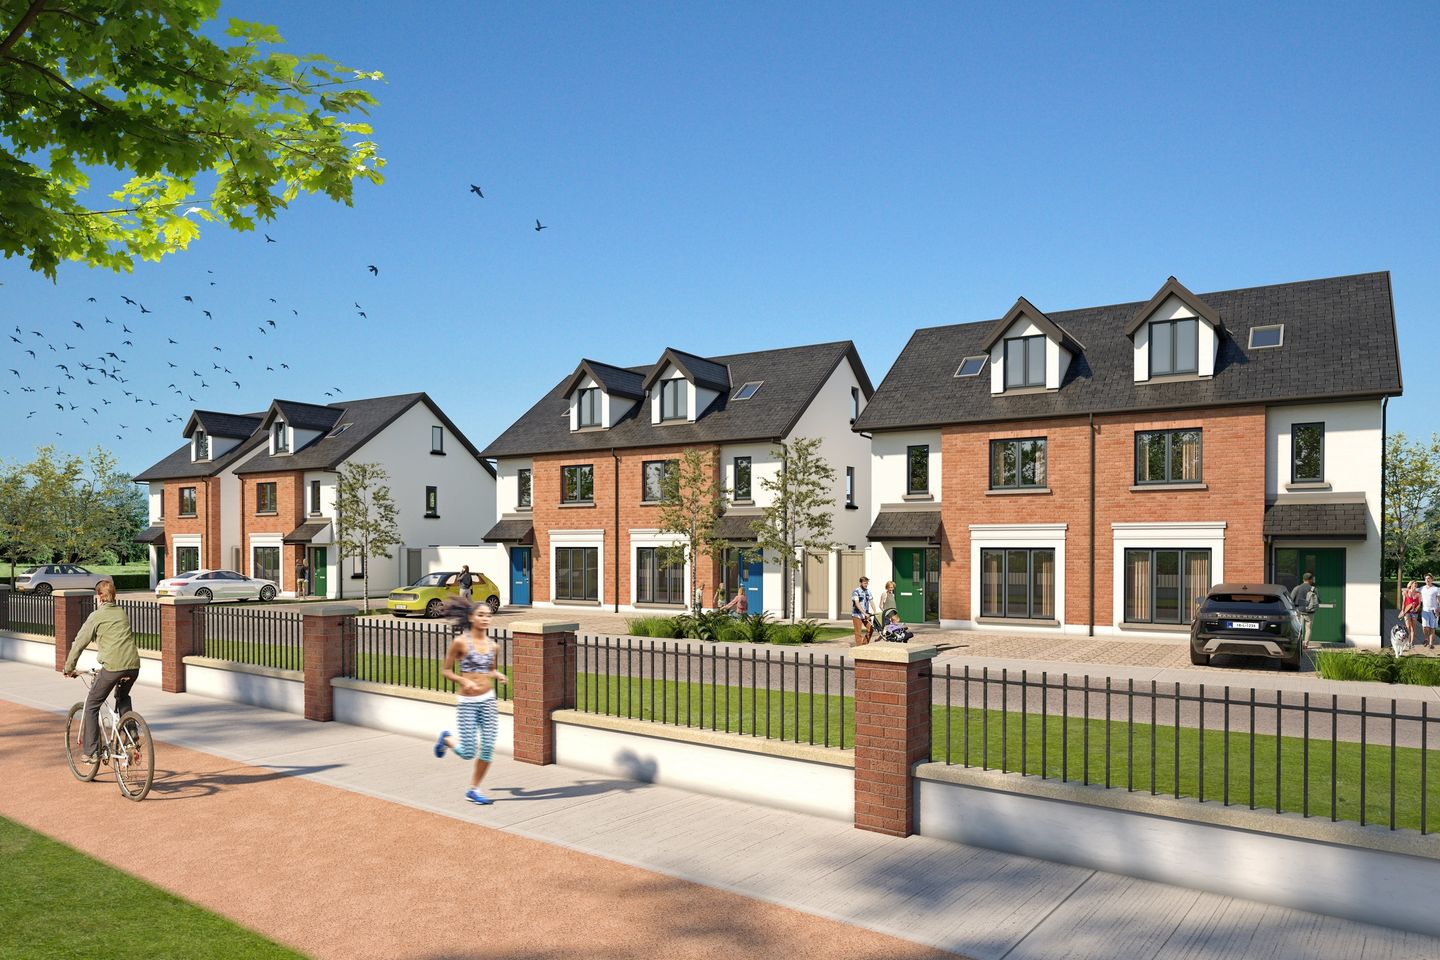 4 Bed, Newtown Meadows, Newtown Meadows, Castletroy, Co. Limerick